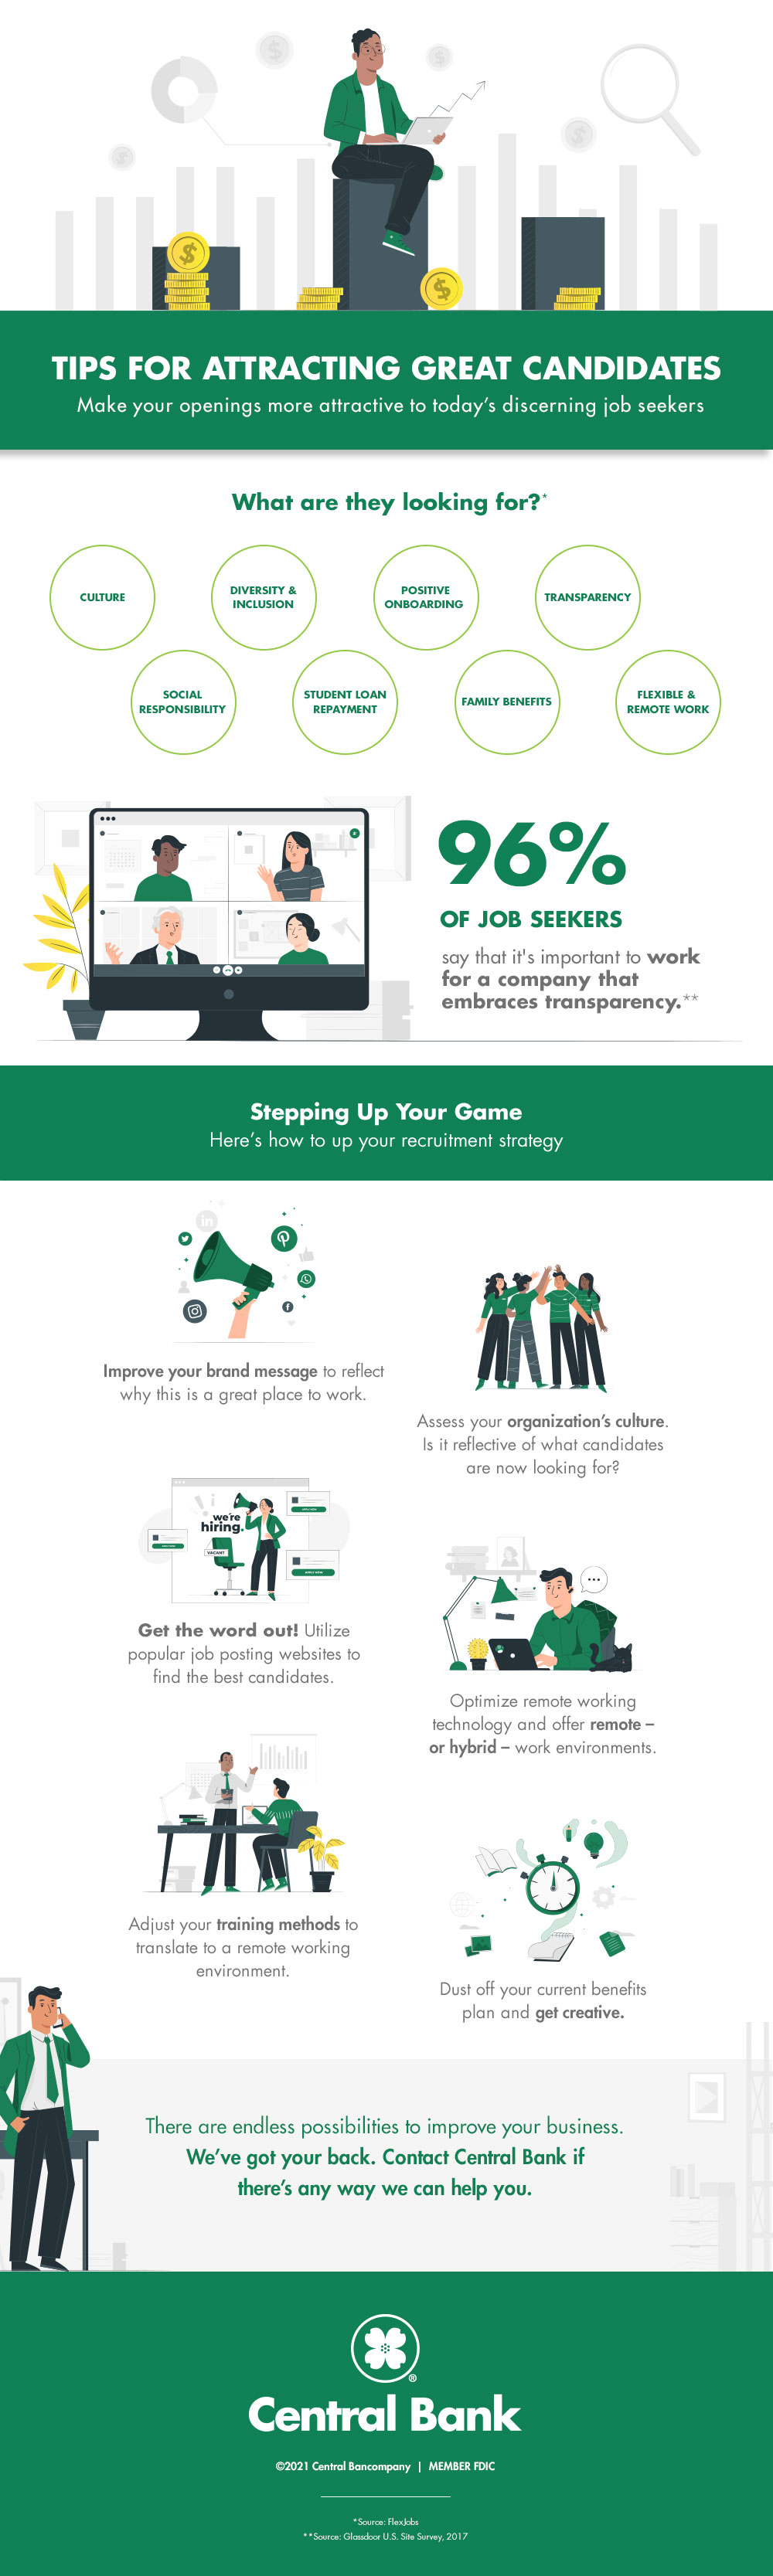 Tips for attracting great candidates infographic